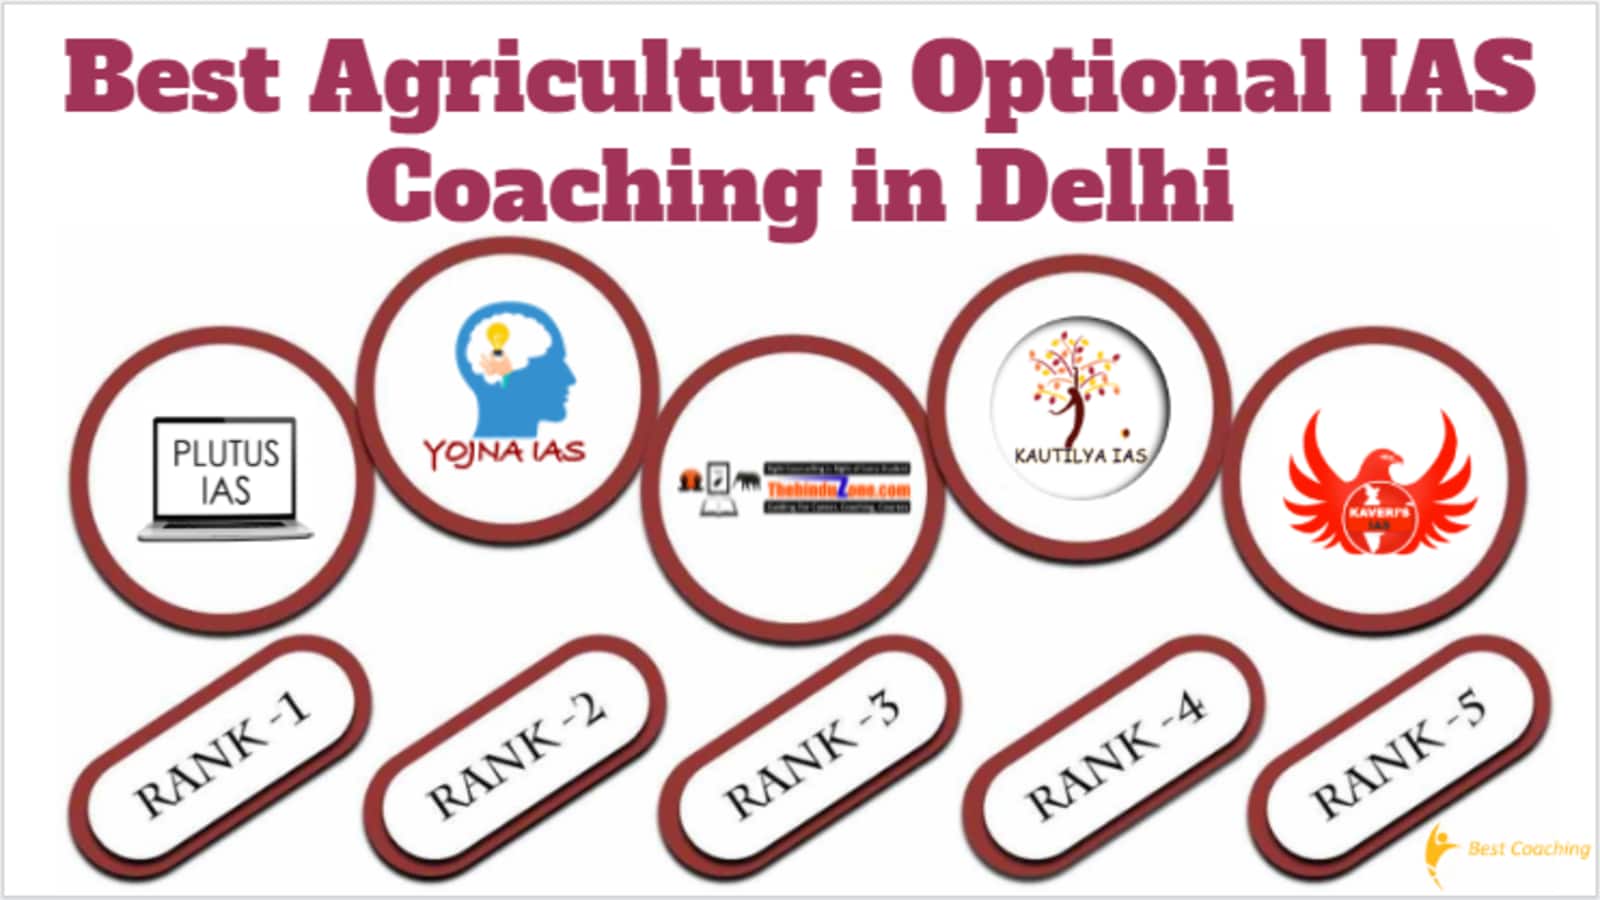 Top Agriculture Optional IAS Coaching in Delhi